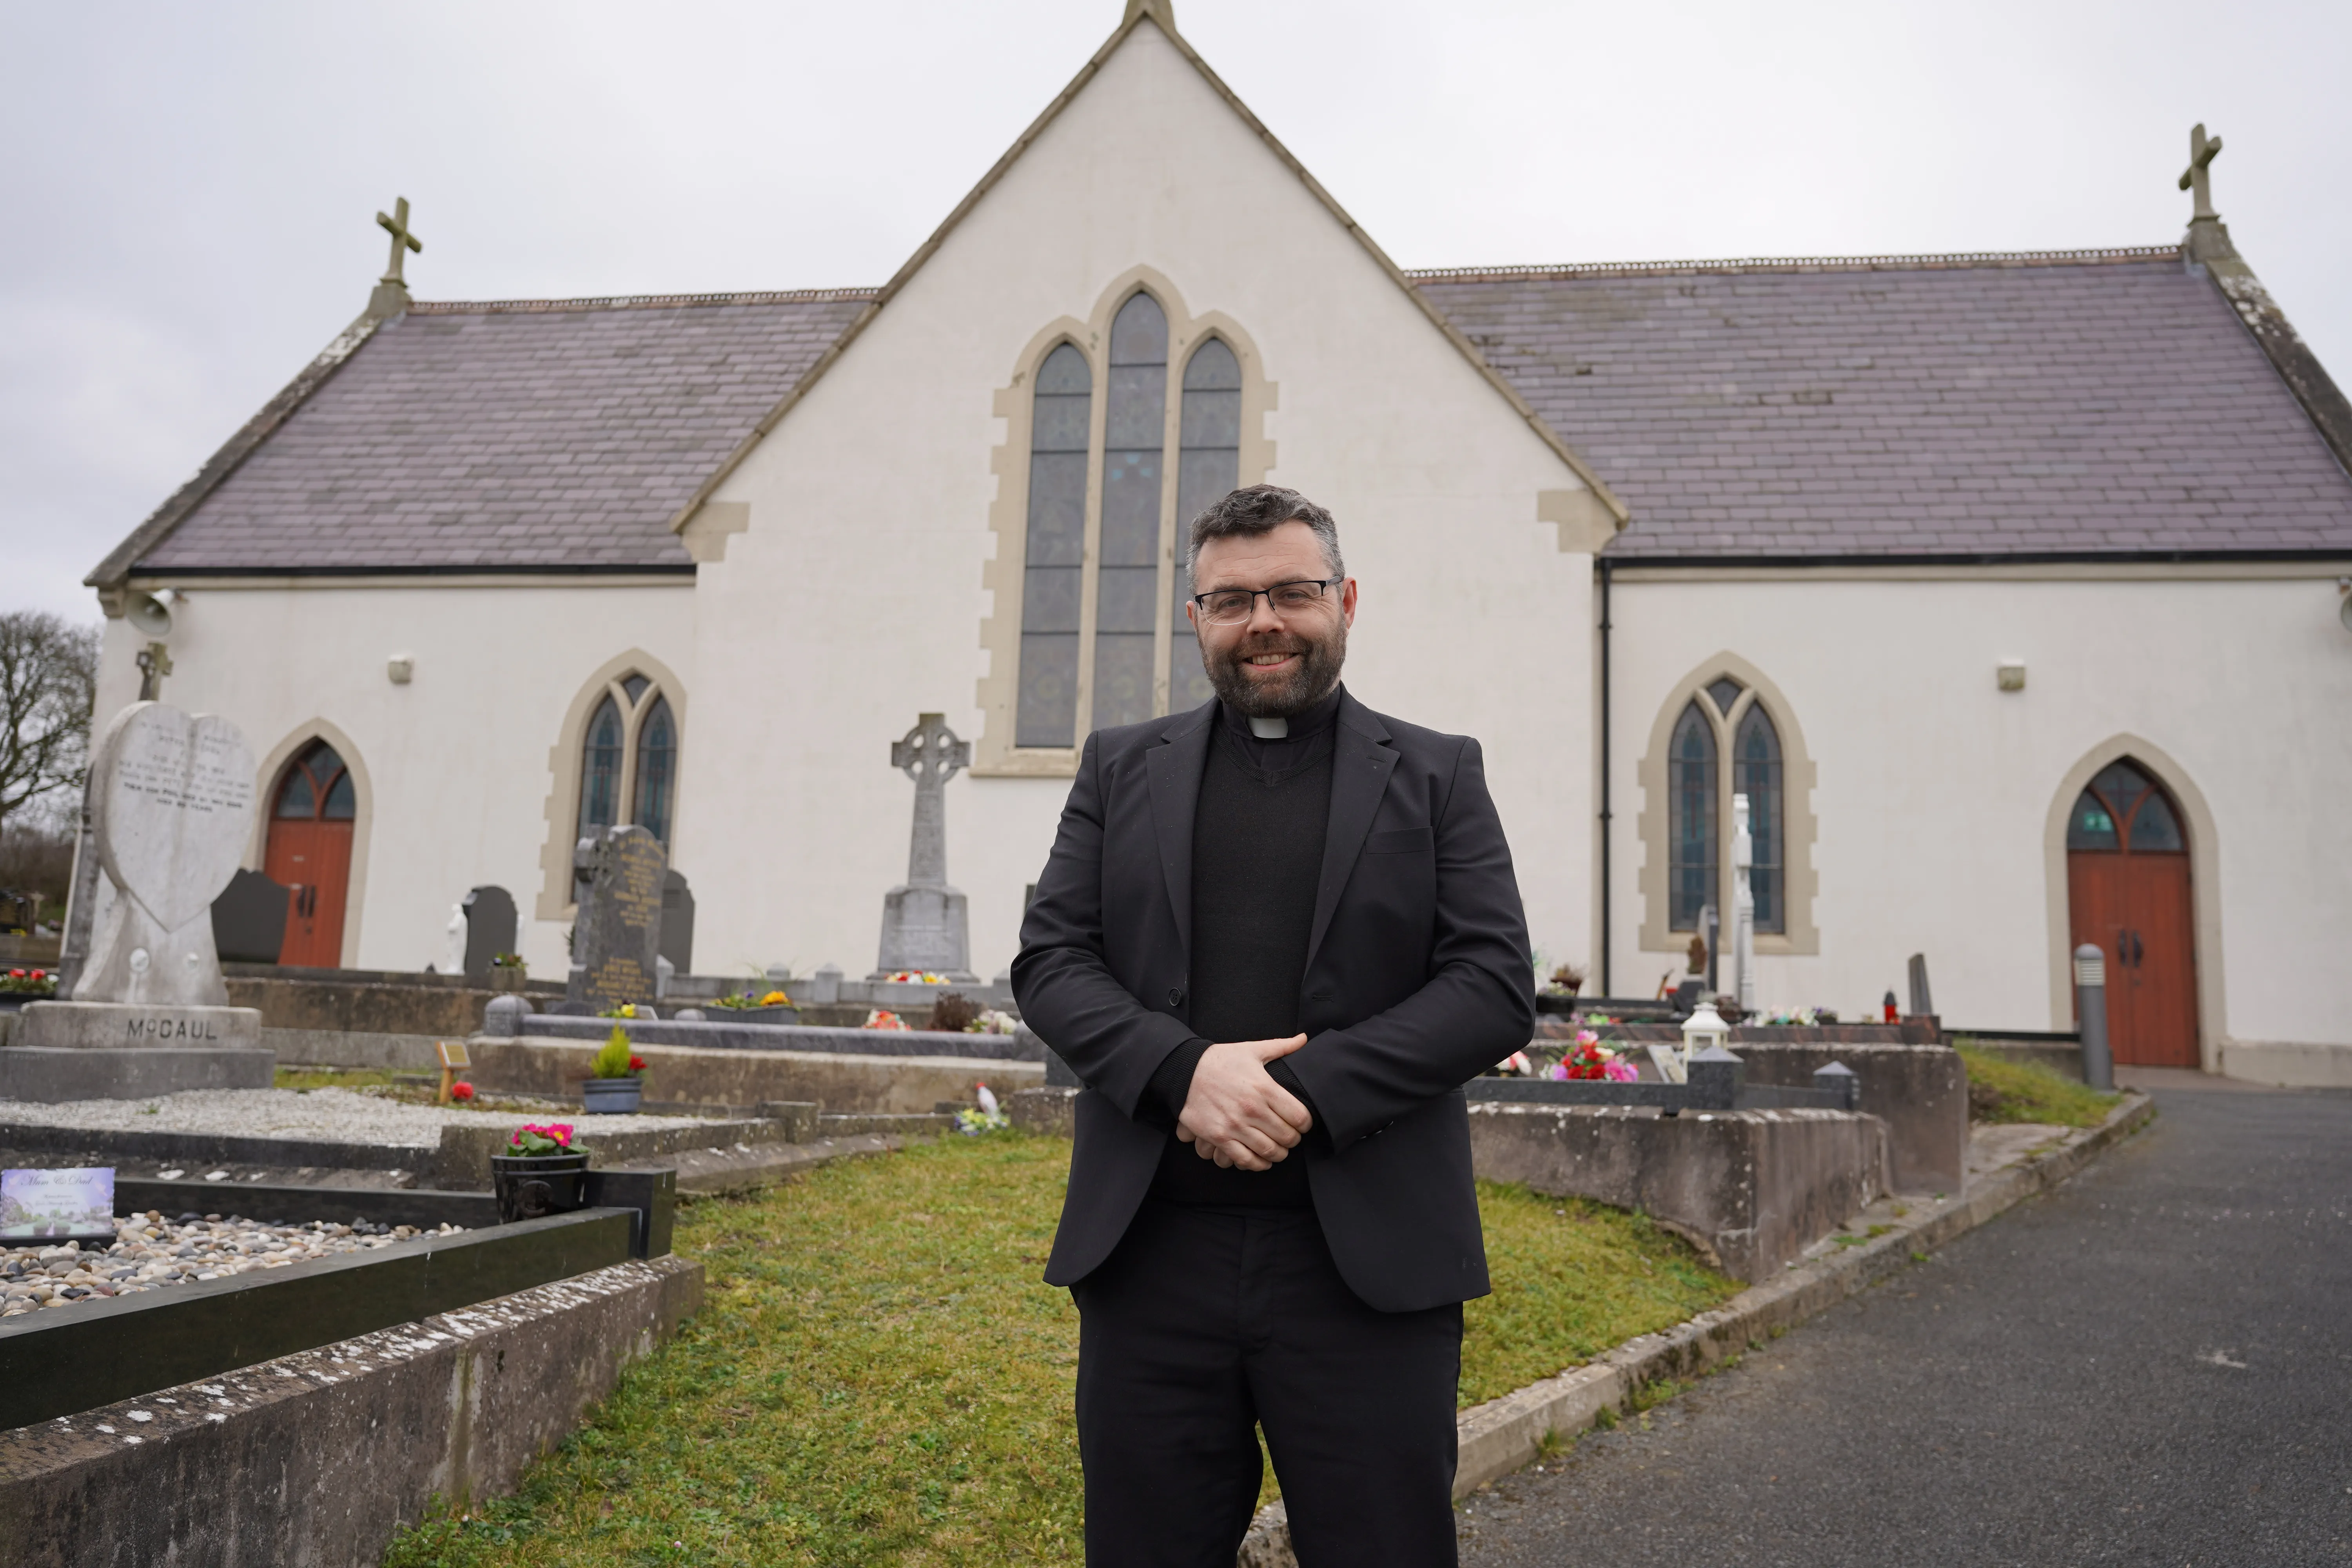 Father Owen Gorman stands outside of the Church of the Sacred Heart, one of his parishes in County Monaghan, Ireland. Colm Flynn/EWTN